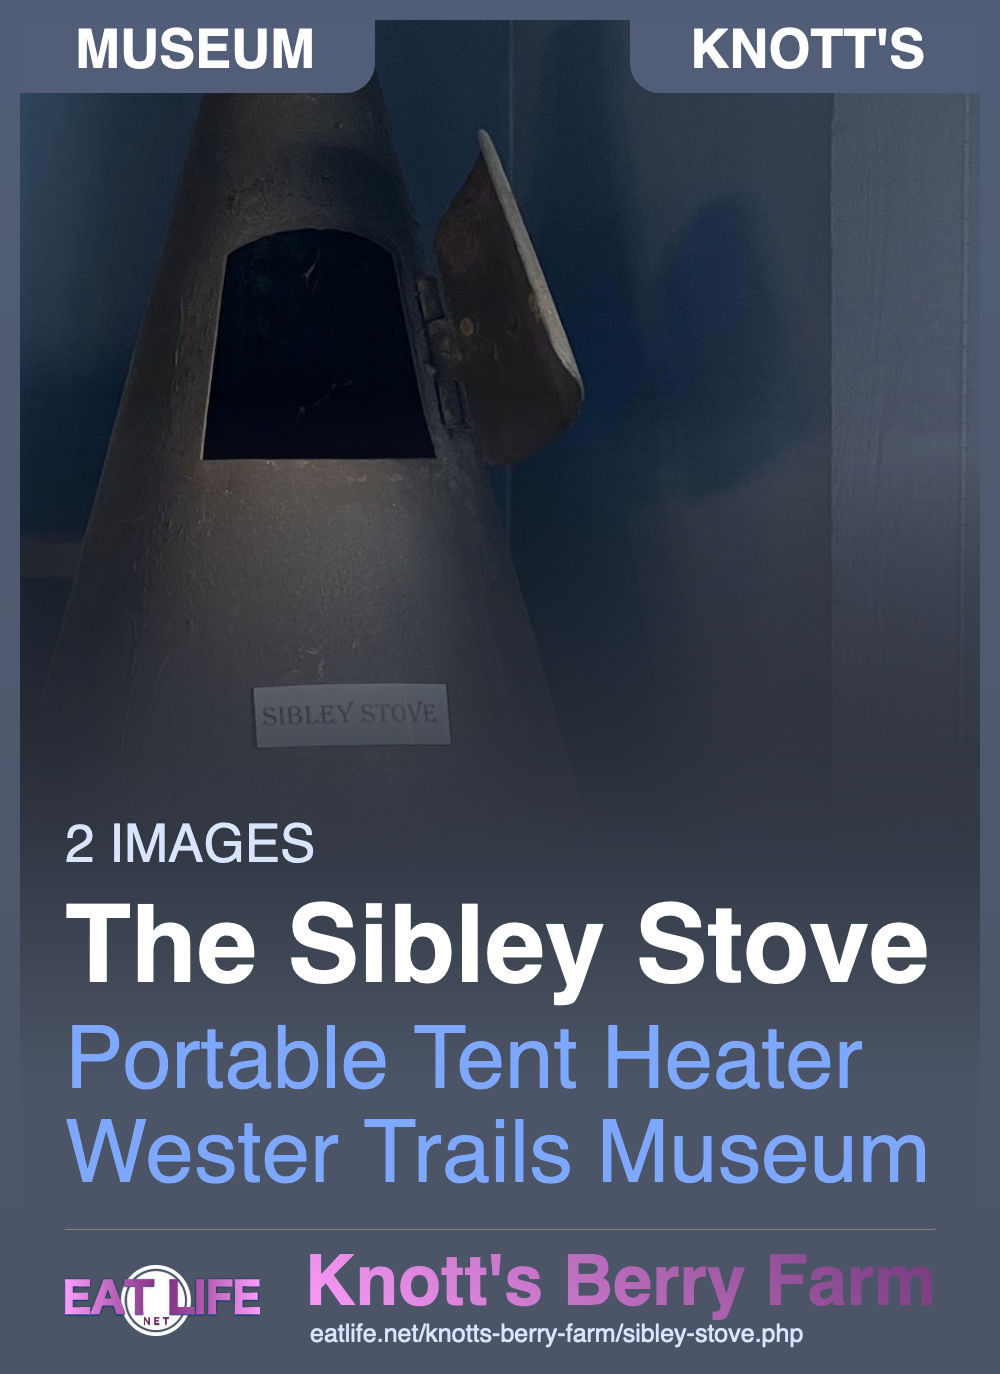 The Sibley Stove